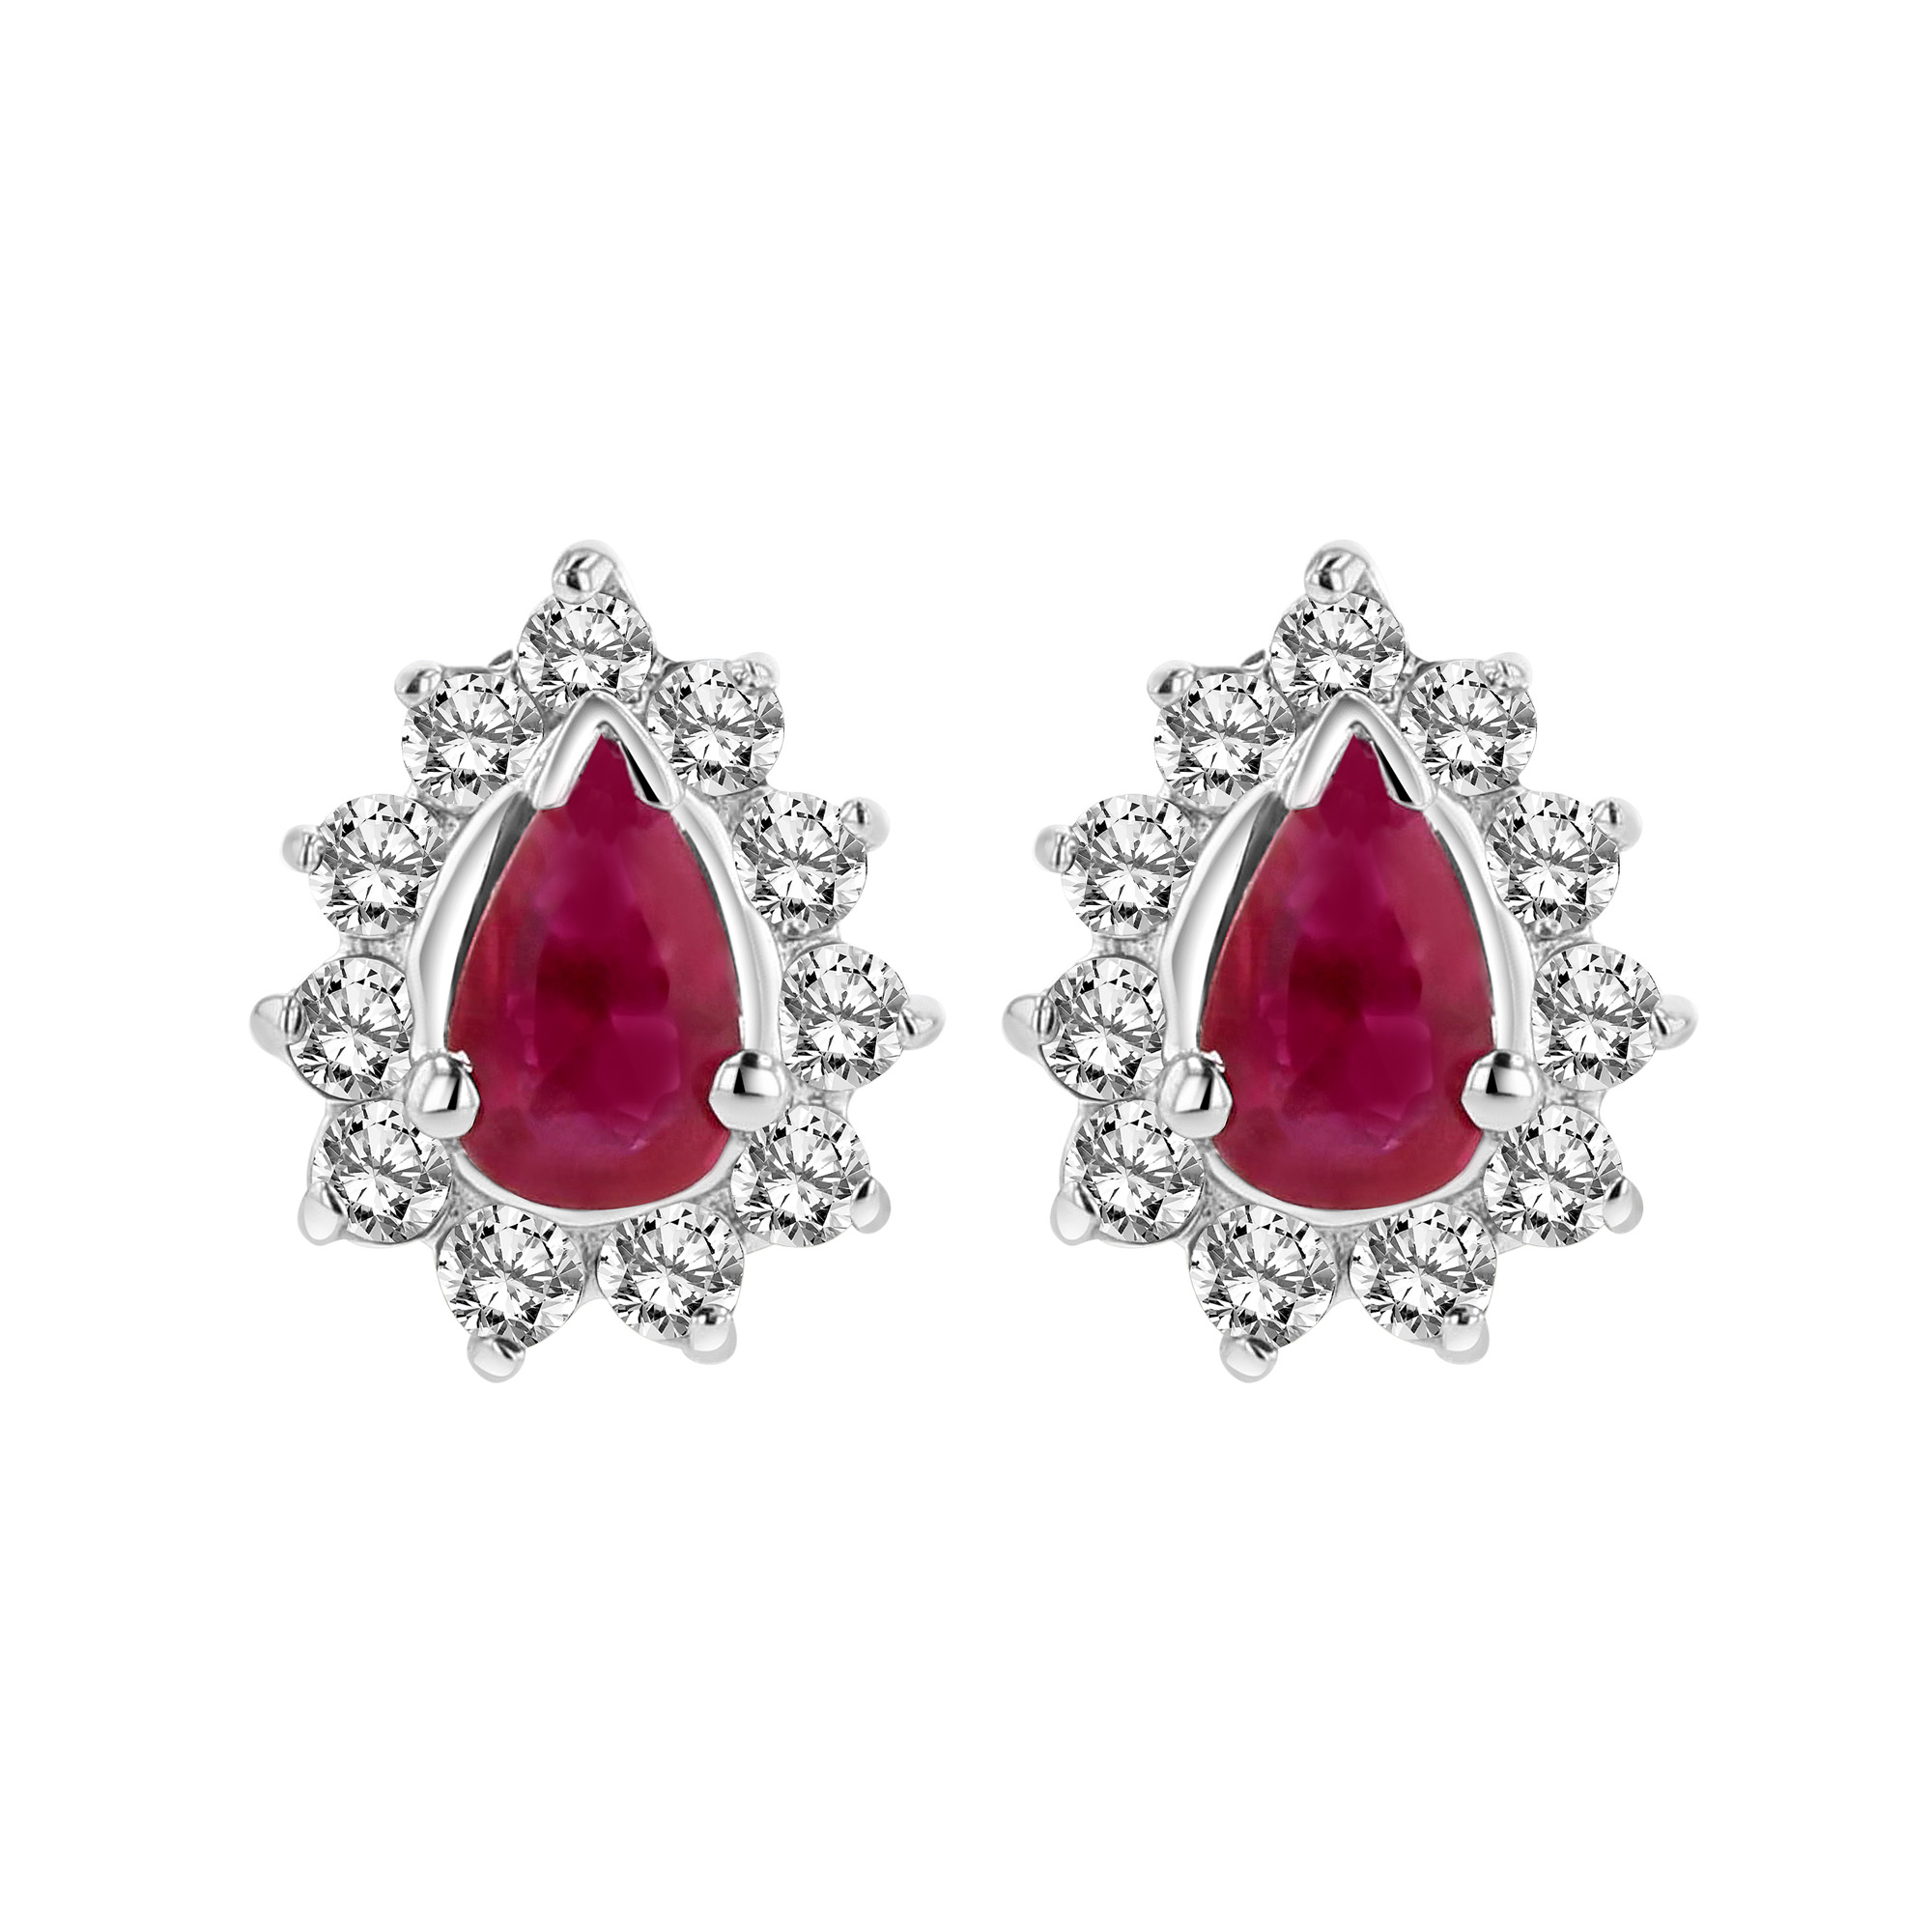 View 0.80cttw Diamond and Natural Heated Ruby Earring in 14k Gold 